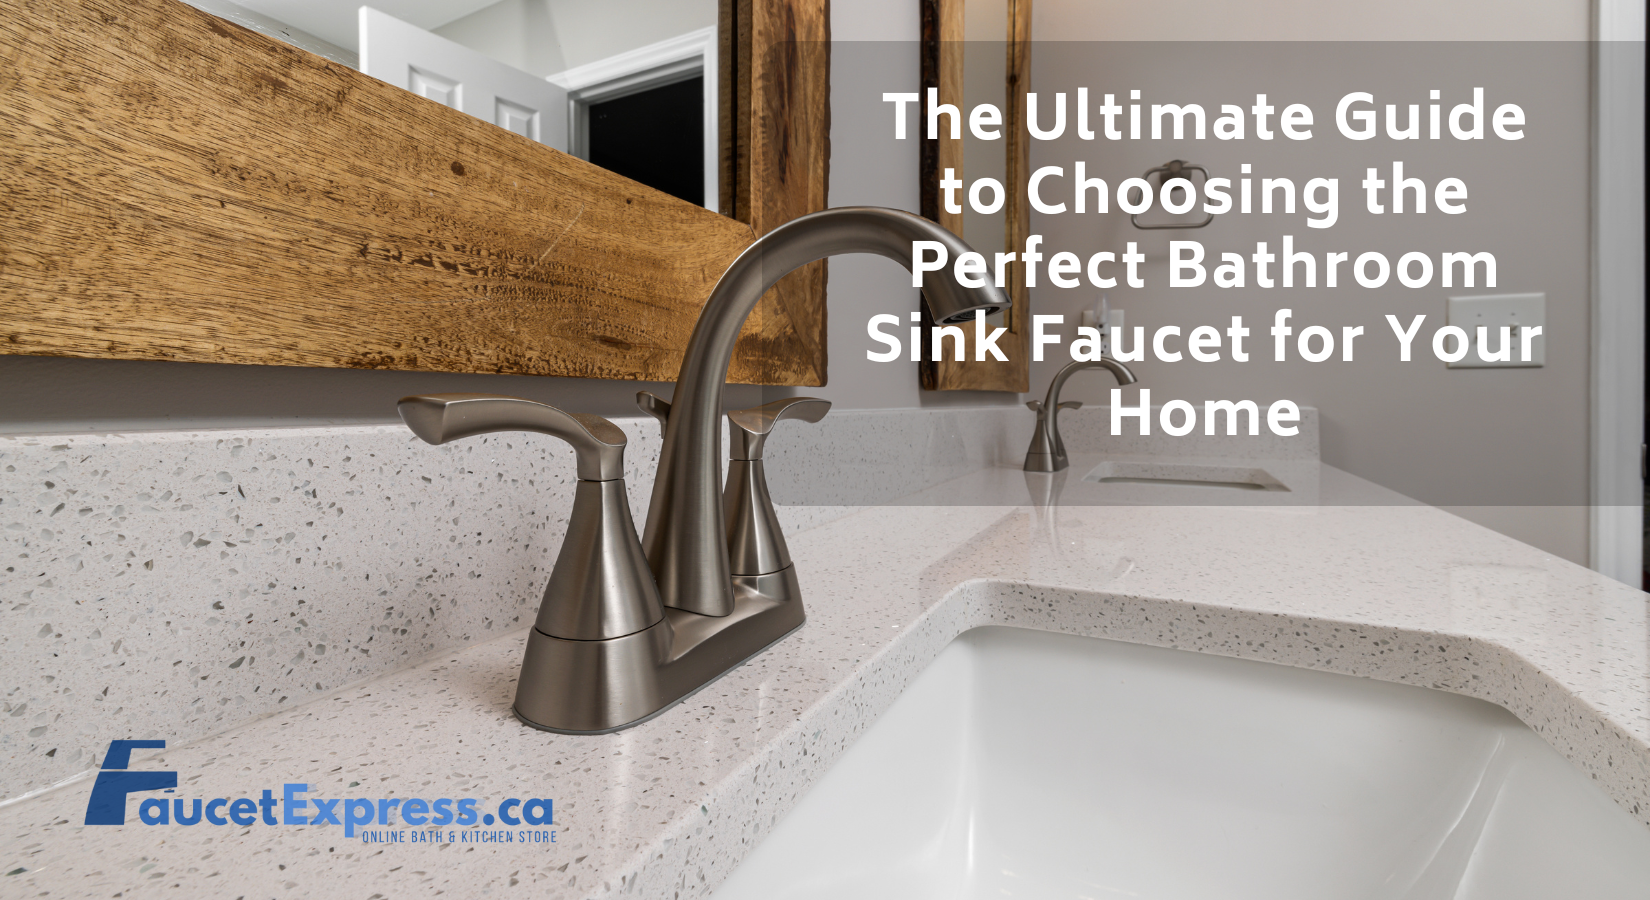 The Ultimate Guide to Choosing the Perfect Bathroom Sink Faucet for Your Home